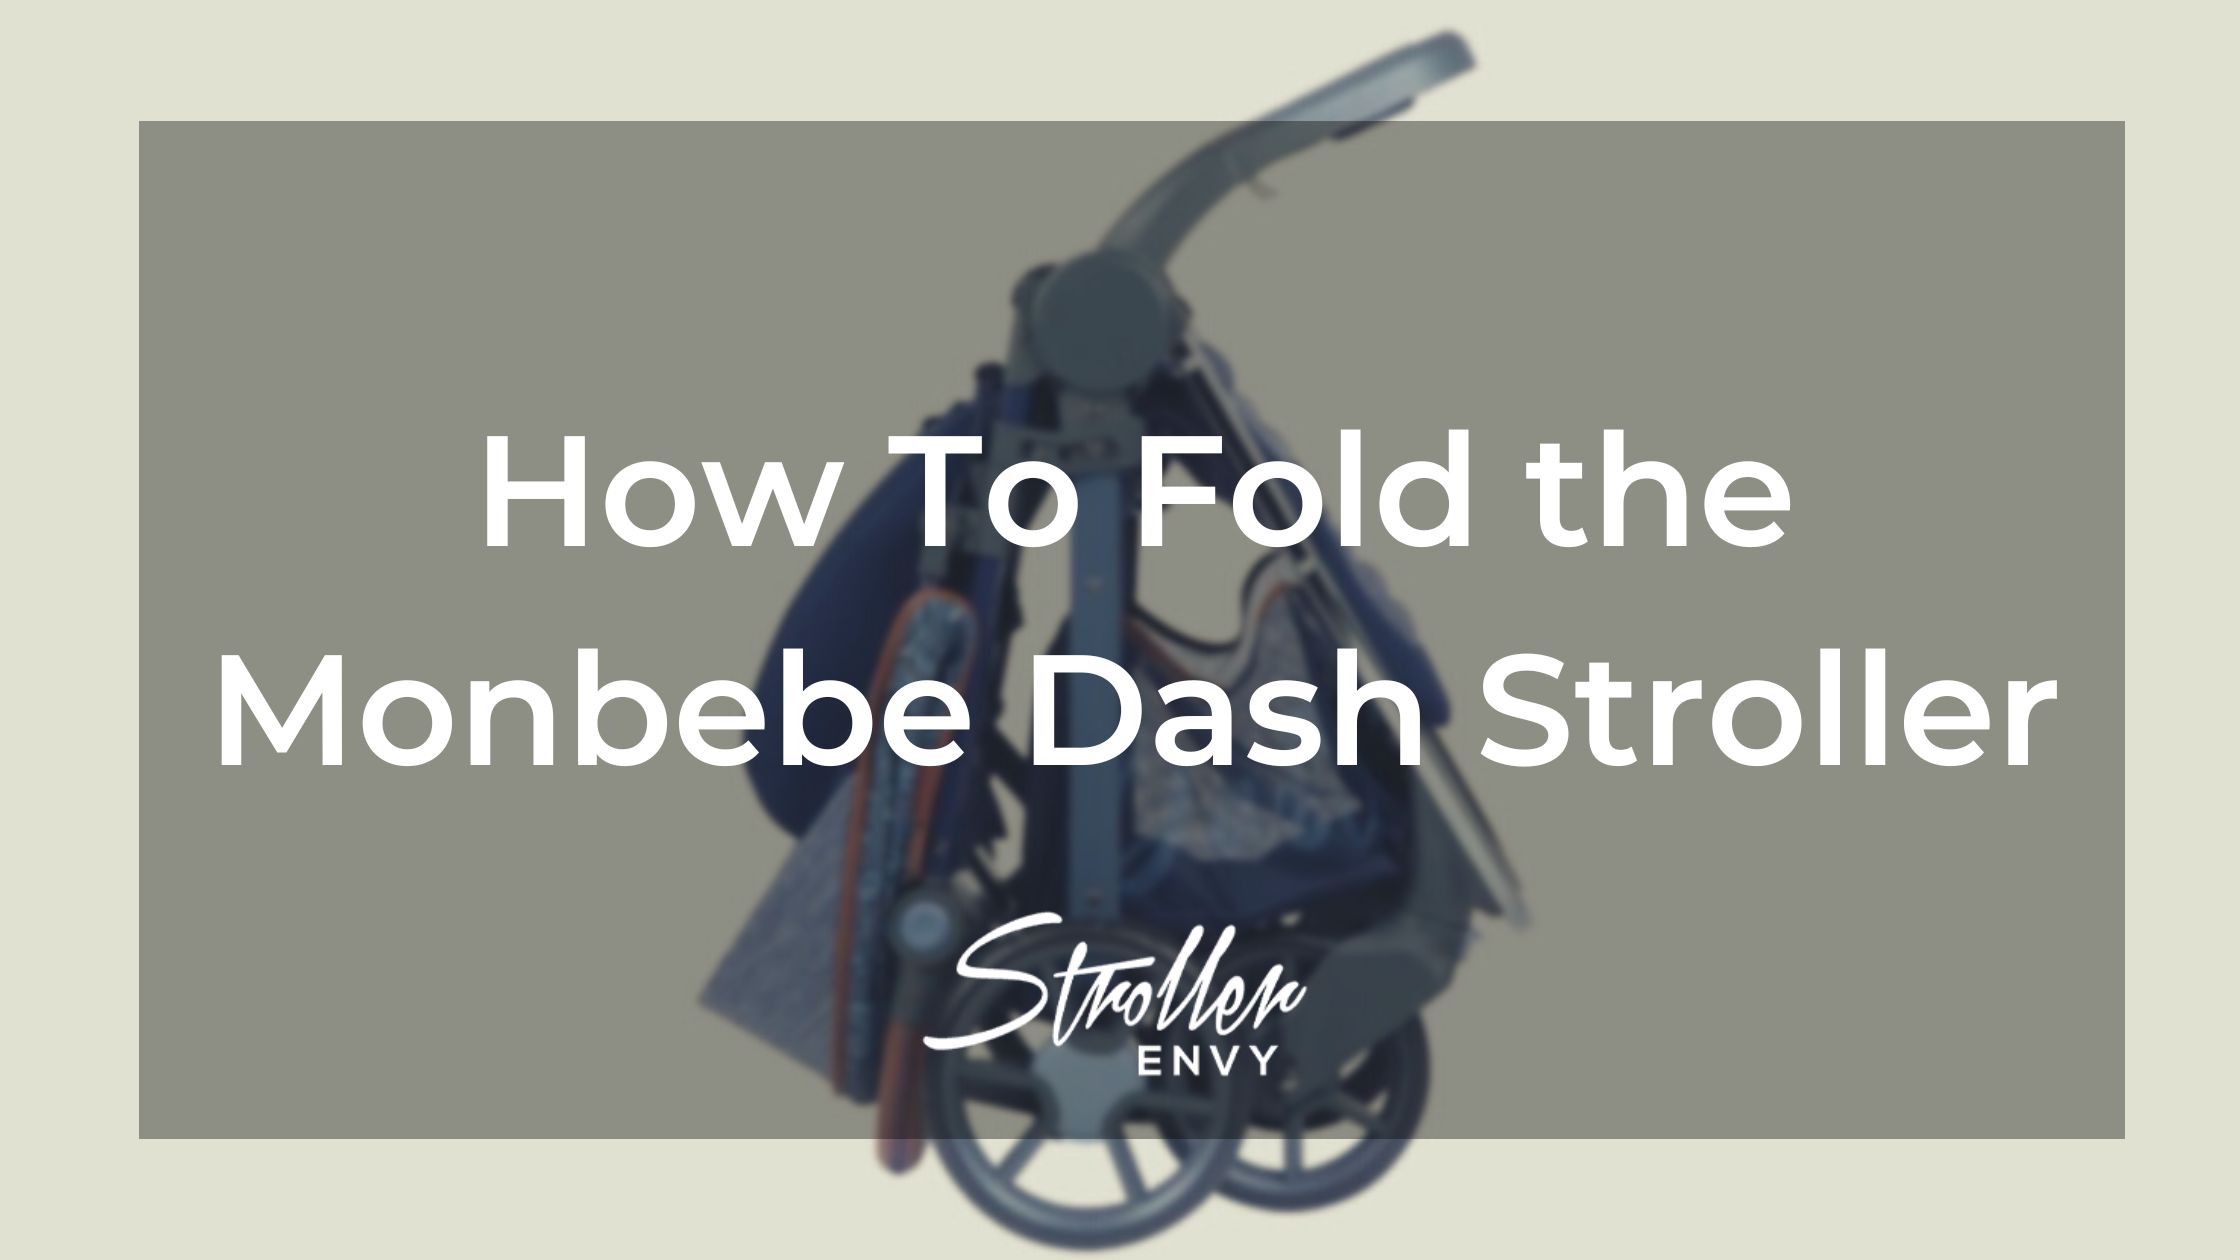 How To Fold the Monbebe Dash Stroller